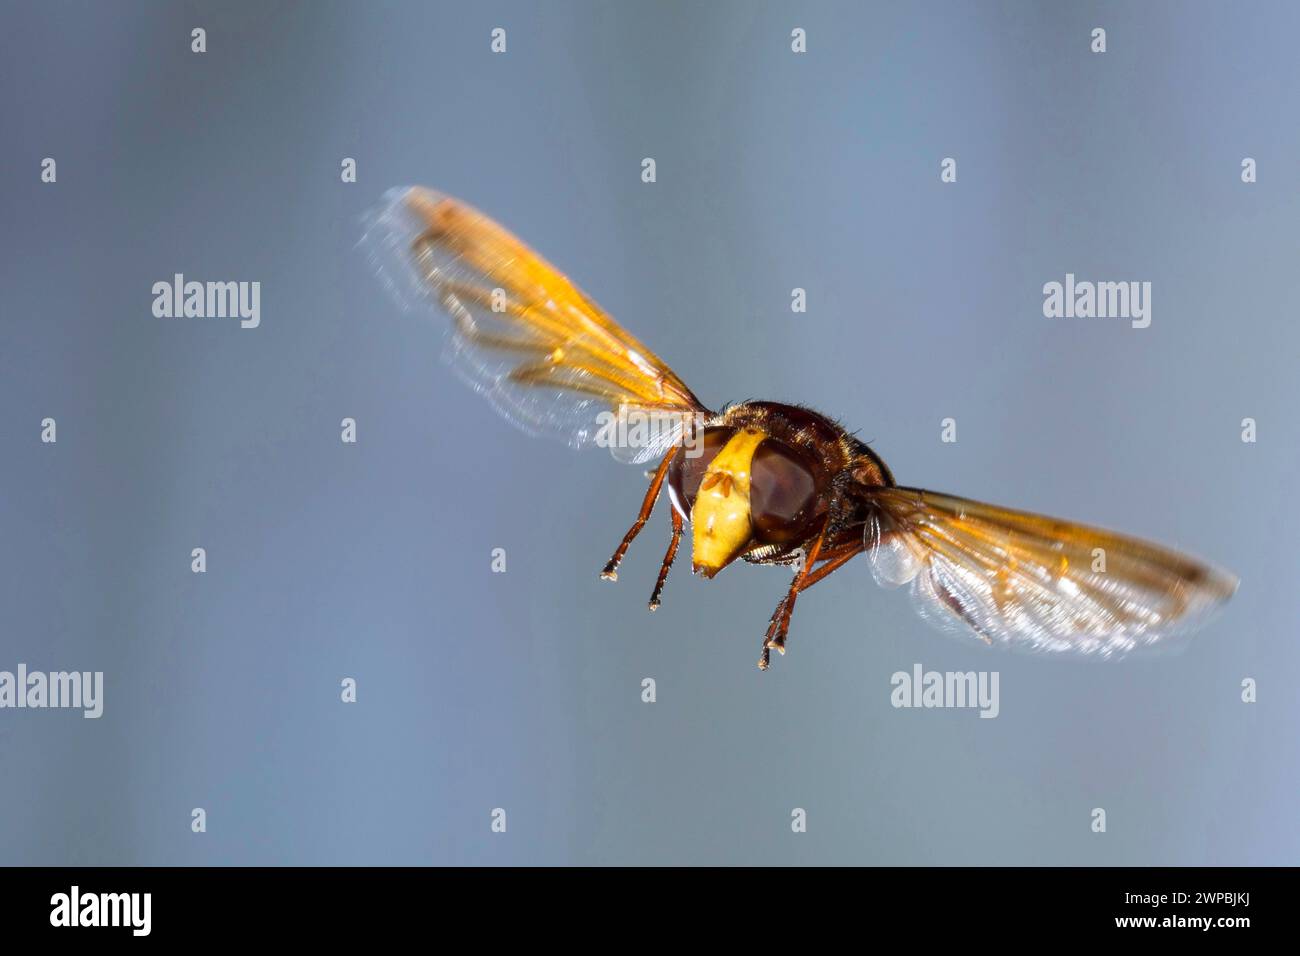 Hornet mimic hoverfly (Volucella zonaria, Volucella zonalis), female in flight, thigh speed photography, Germany Stock Photo